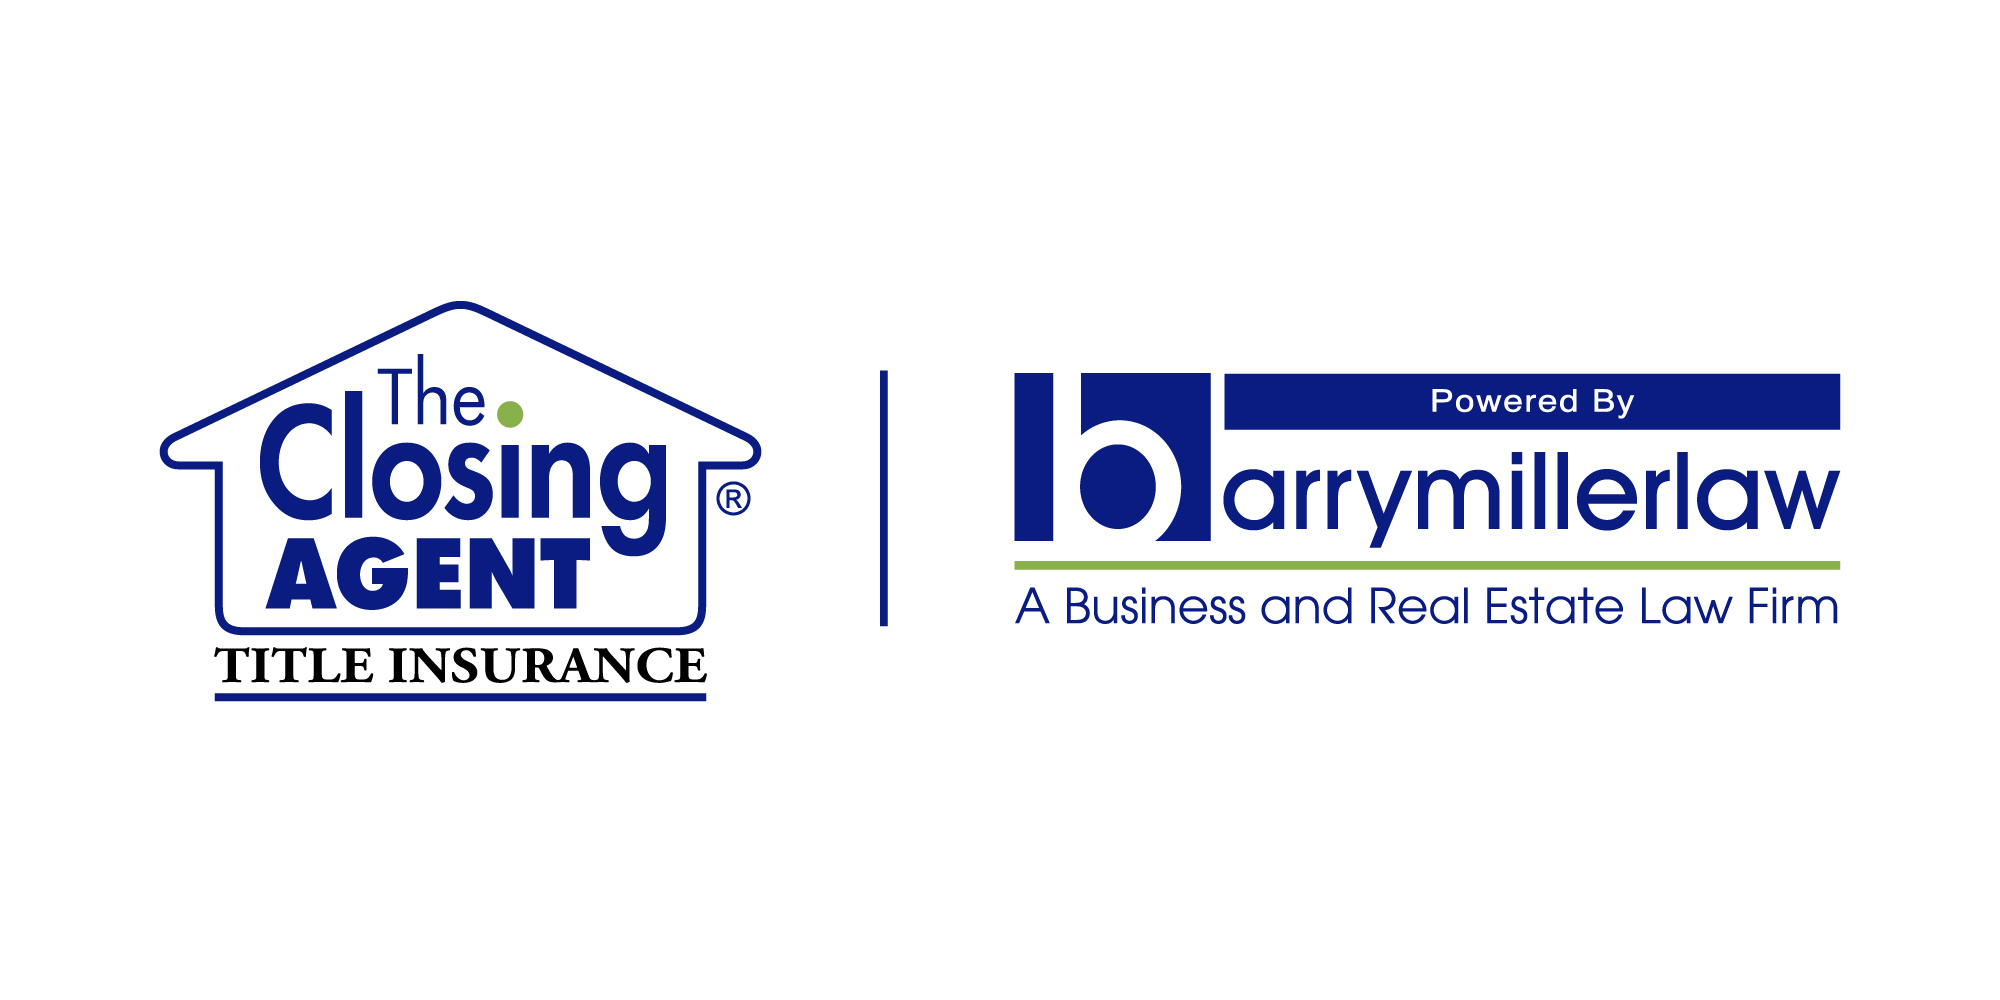 The Closing Agent Powered By Barry Miller Law logo